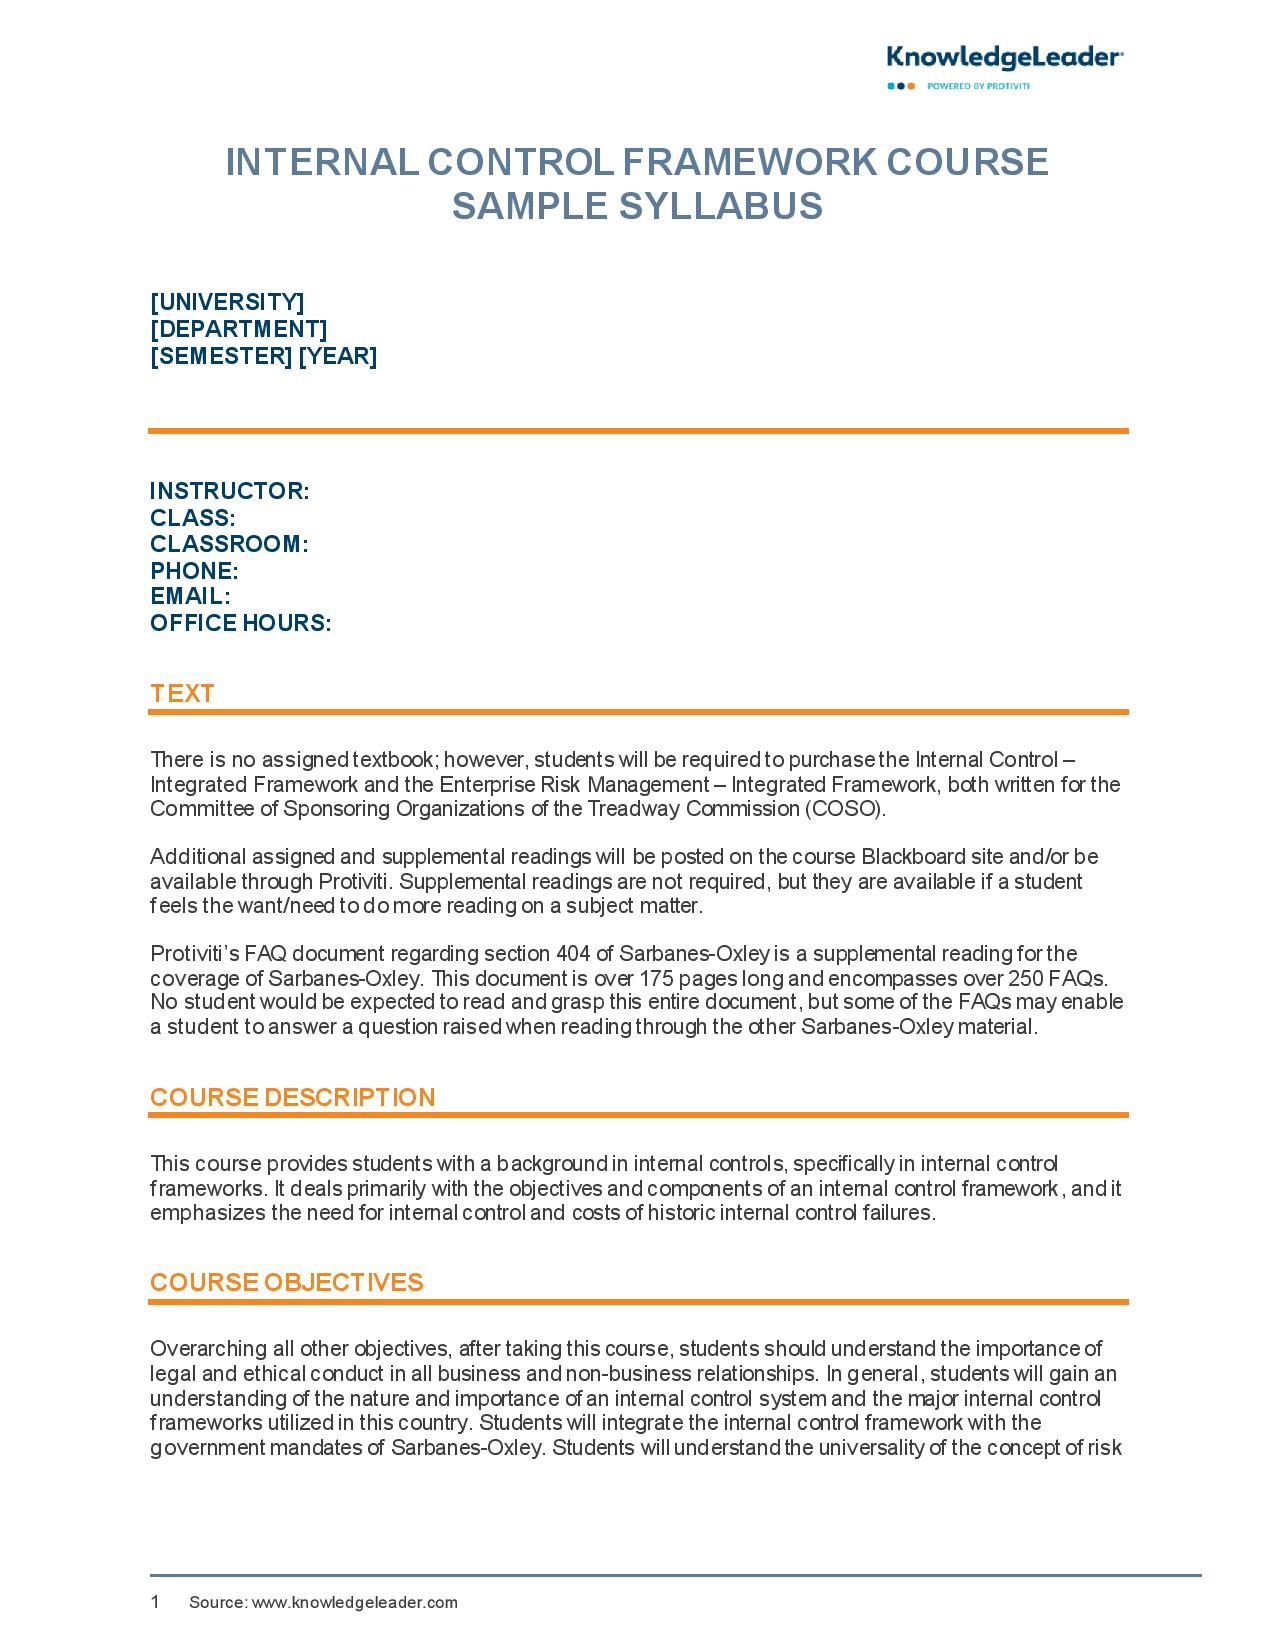 Screenshot of the first page of Internal Control Framework Course Sample Syllabus